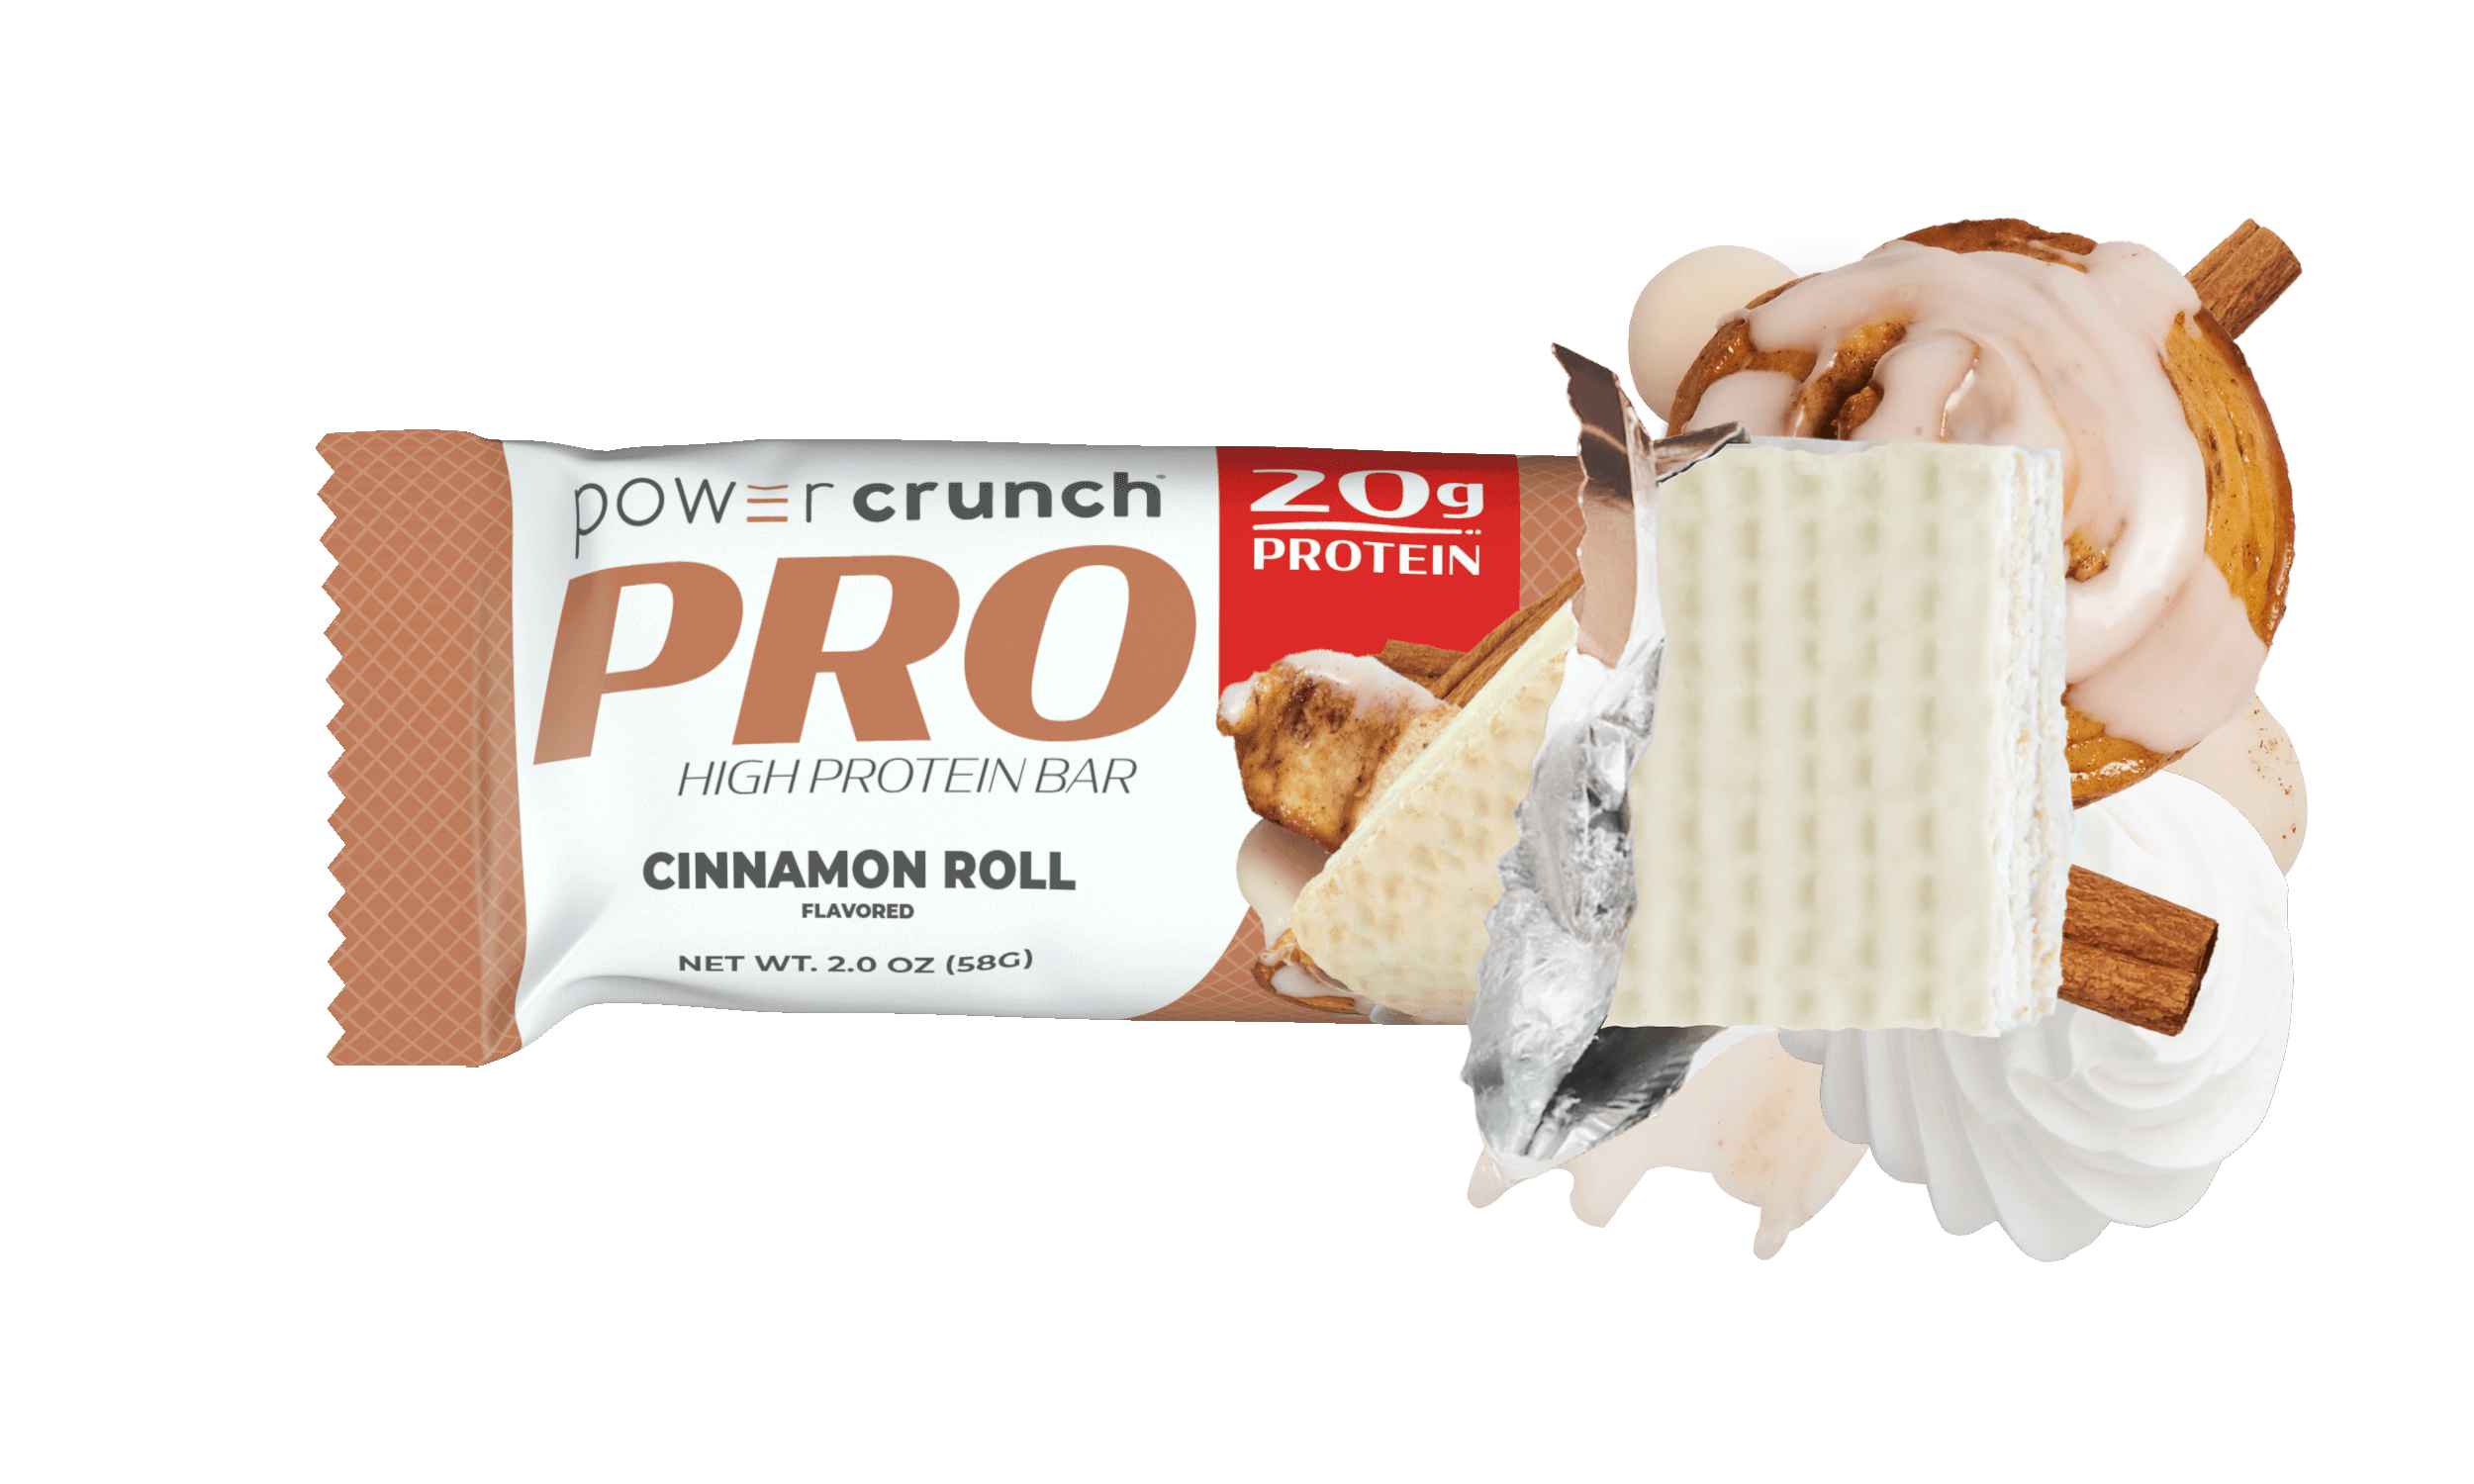 cinnamon roll 20g protein bars pictured with cinnamon flavors